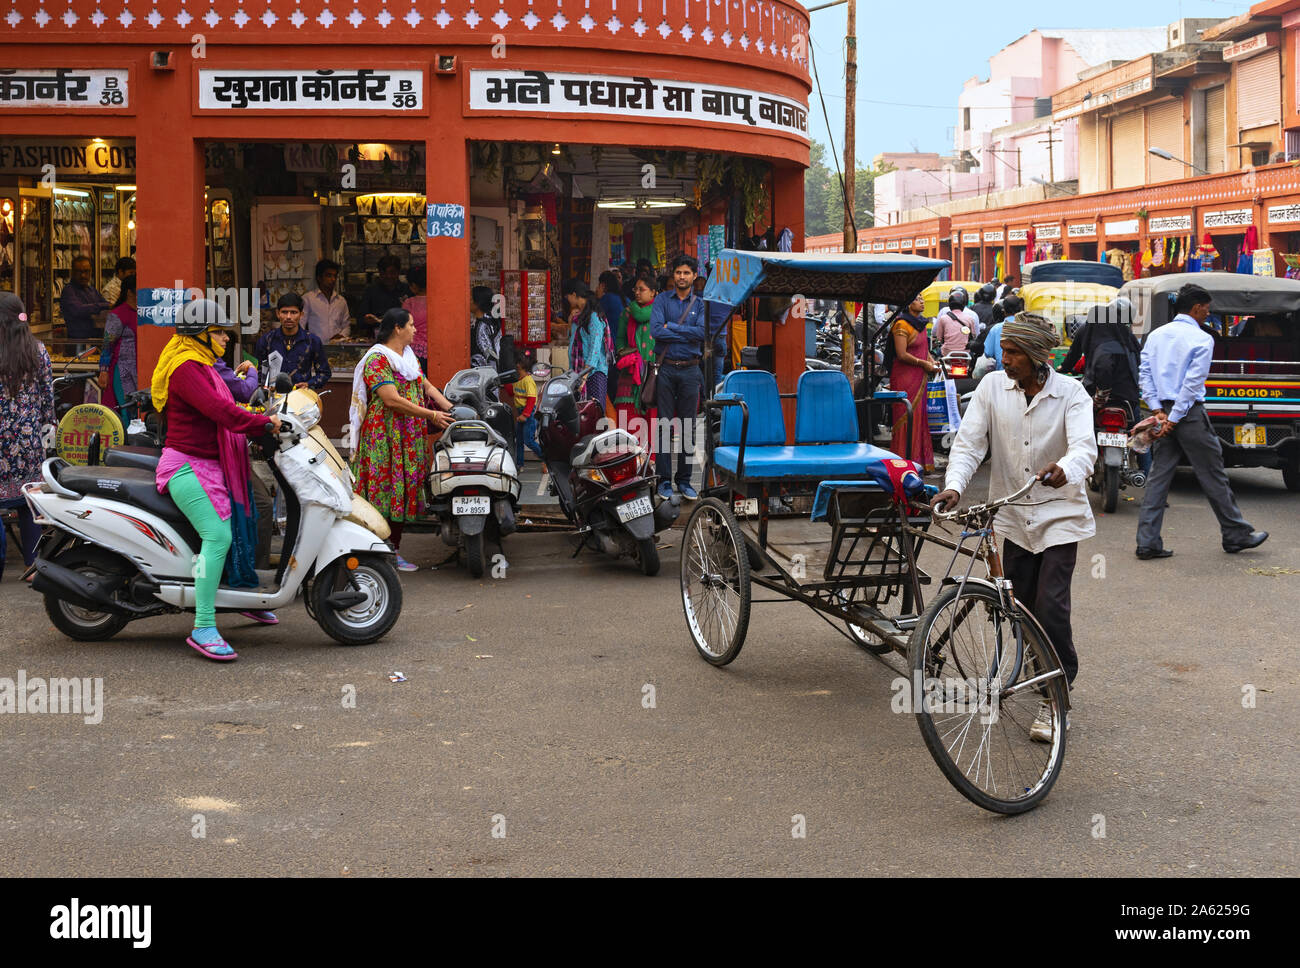 Life on the street in Jaipur, India Stock Photo